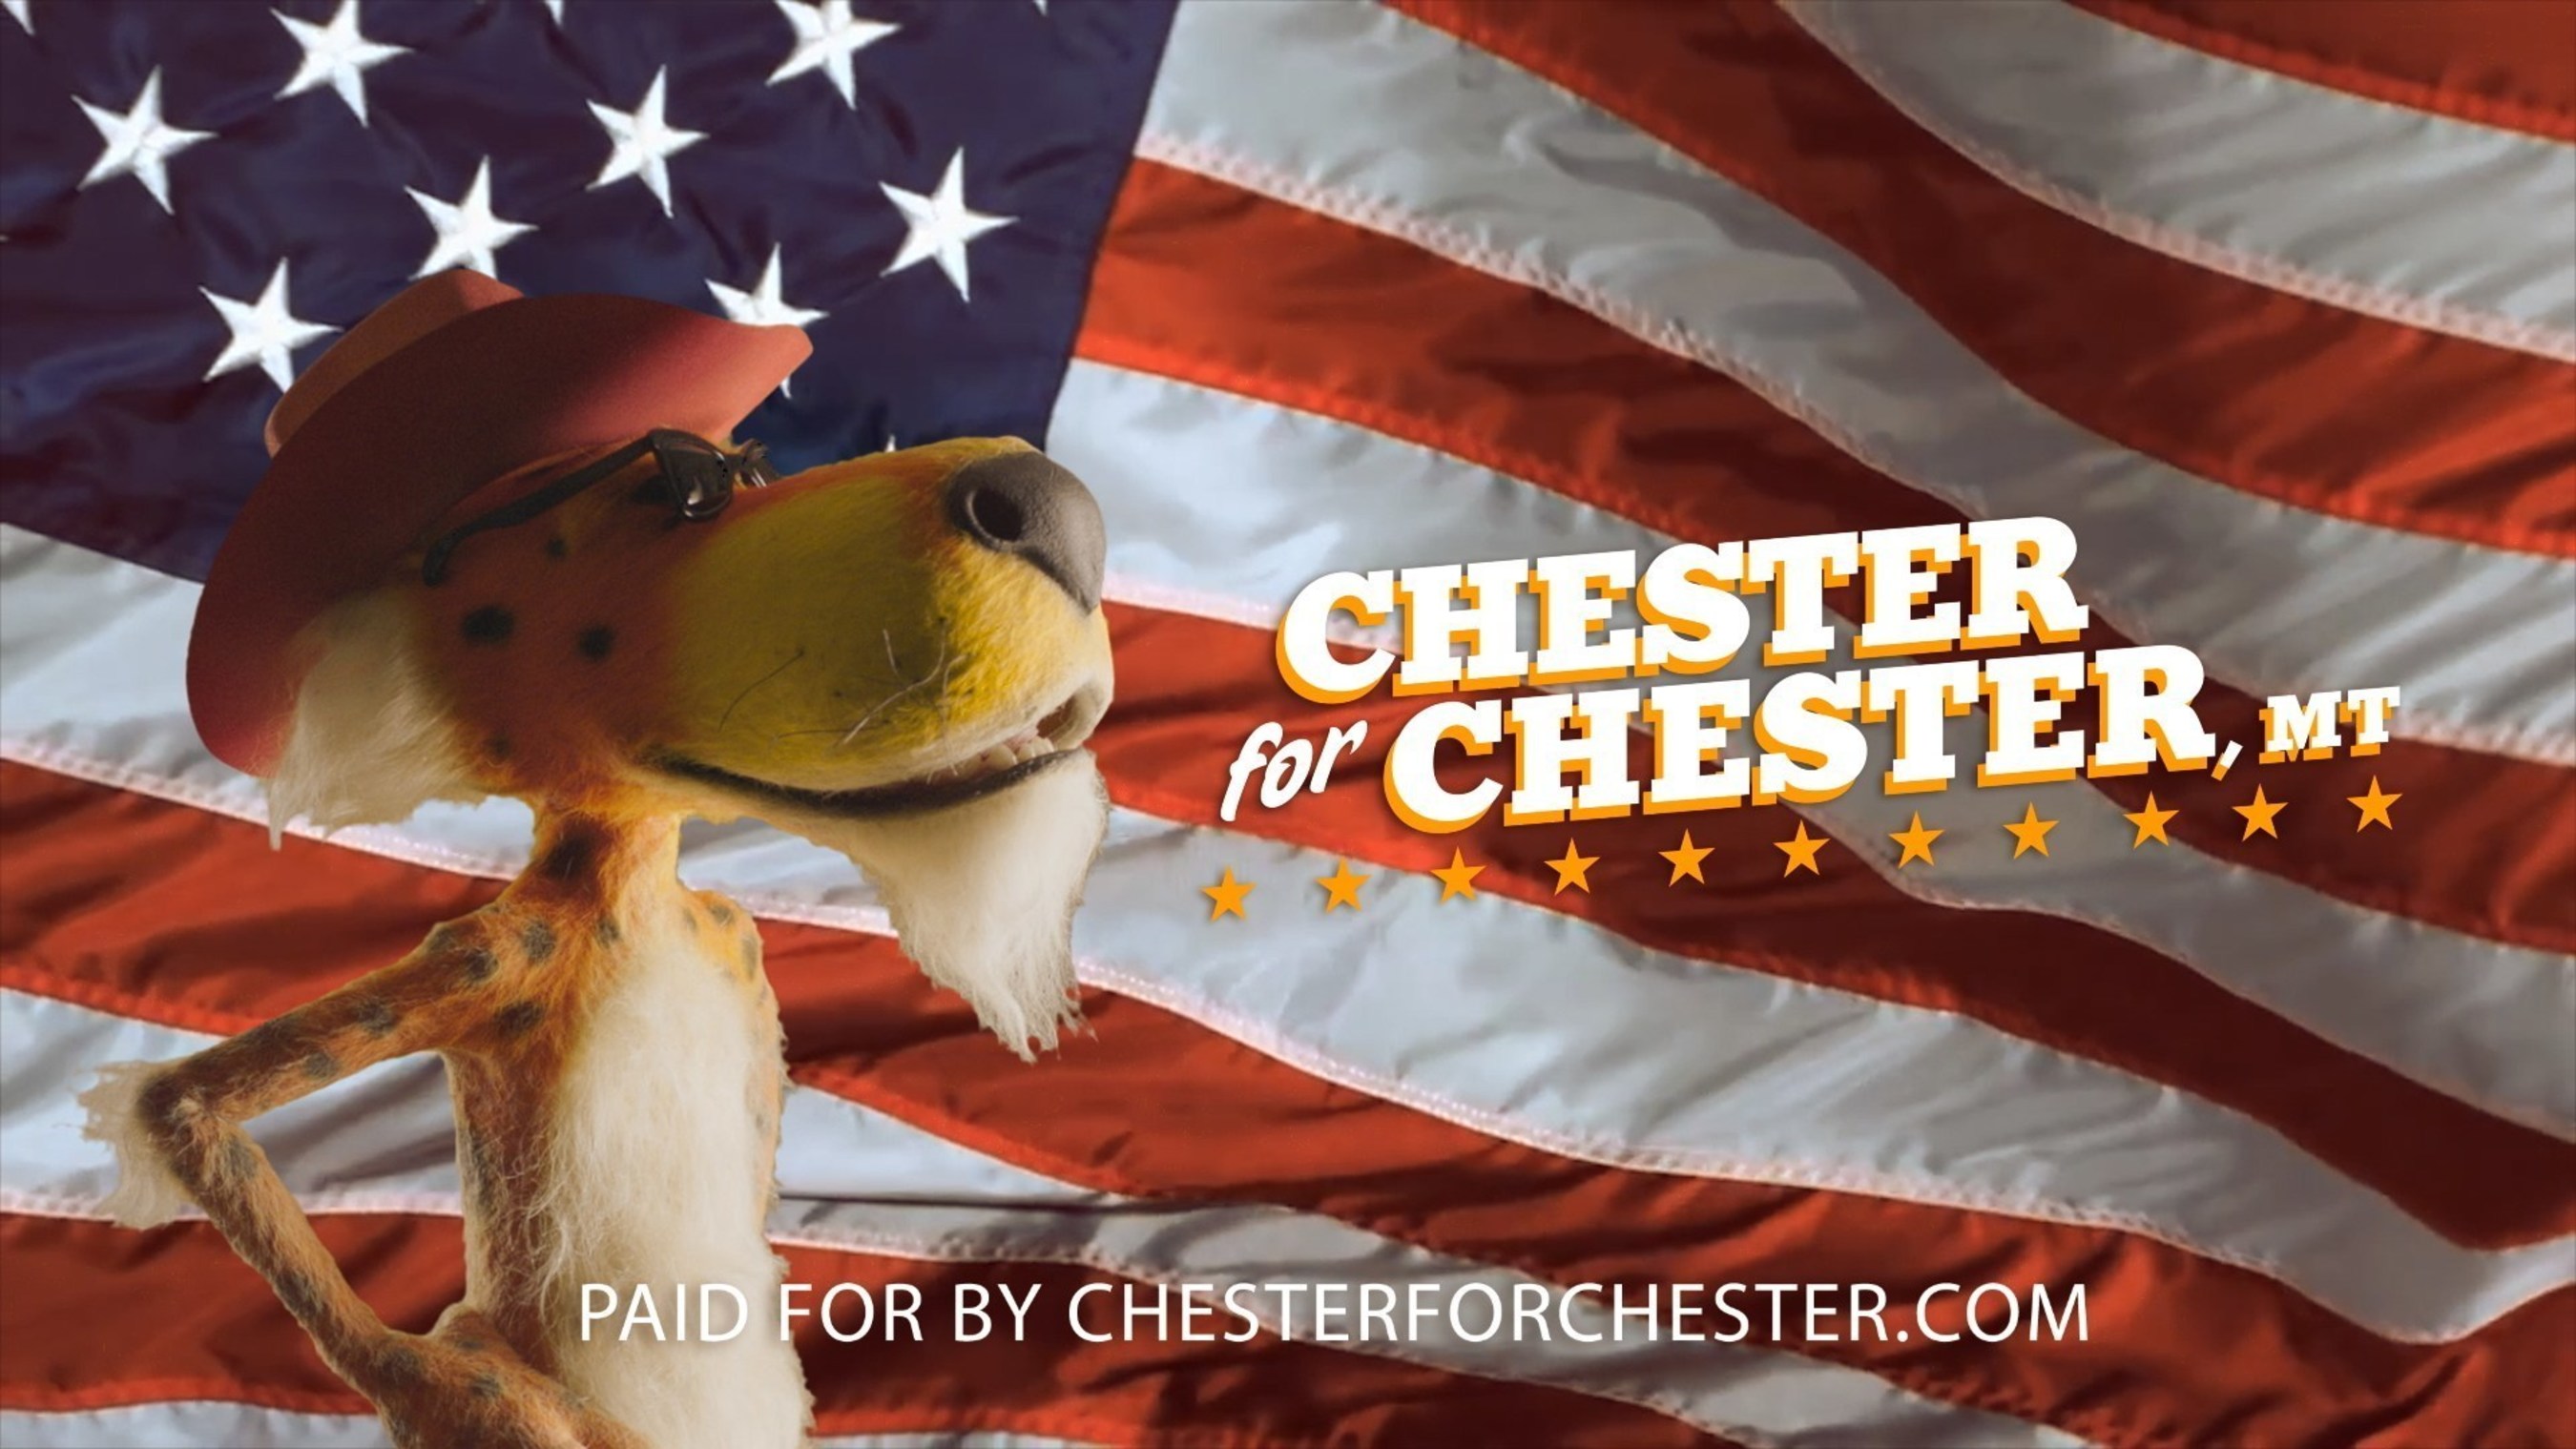 Chester Cheetah, the official spokes-cheetah of the Cheetos brand, is trying his paw at politics by campaigning for mayor of Chester, Mont.